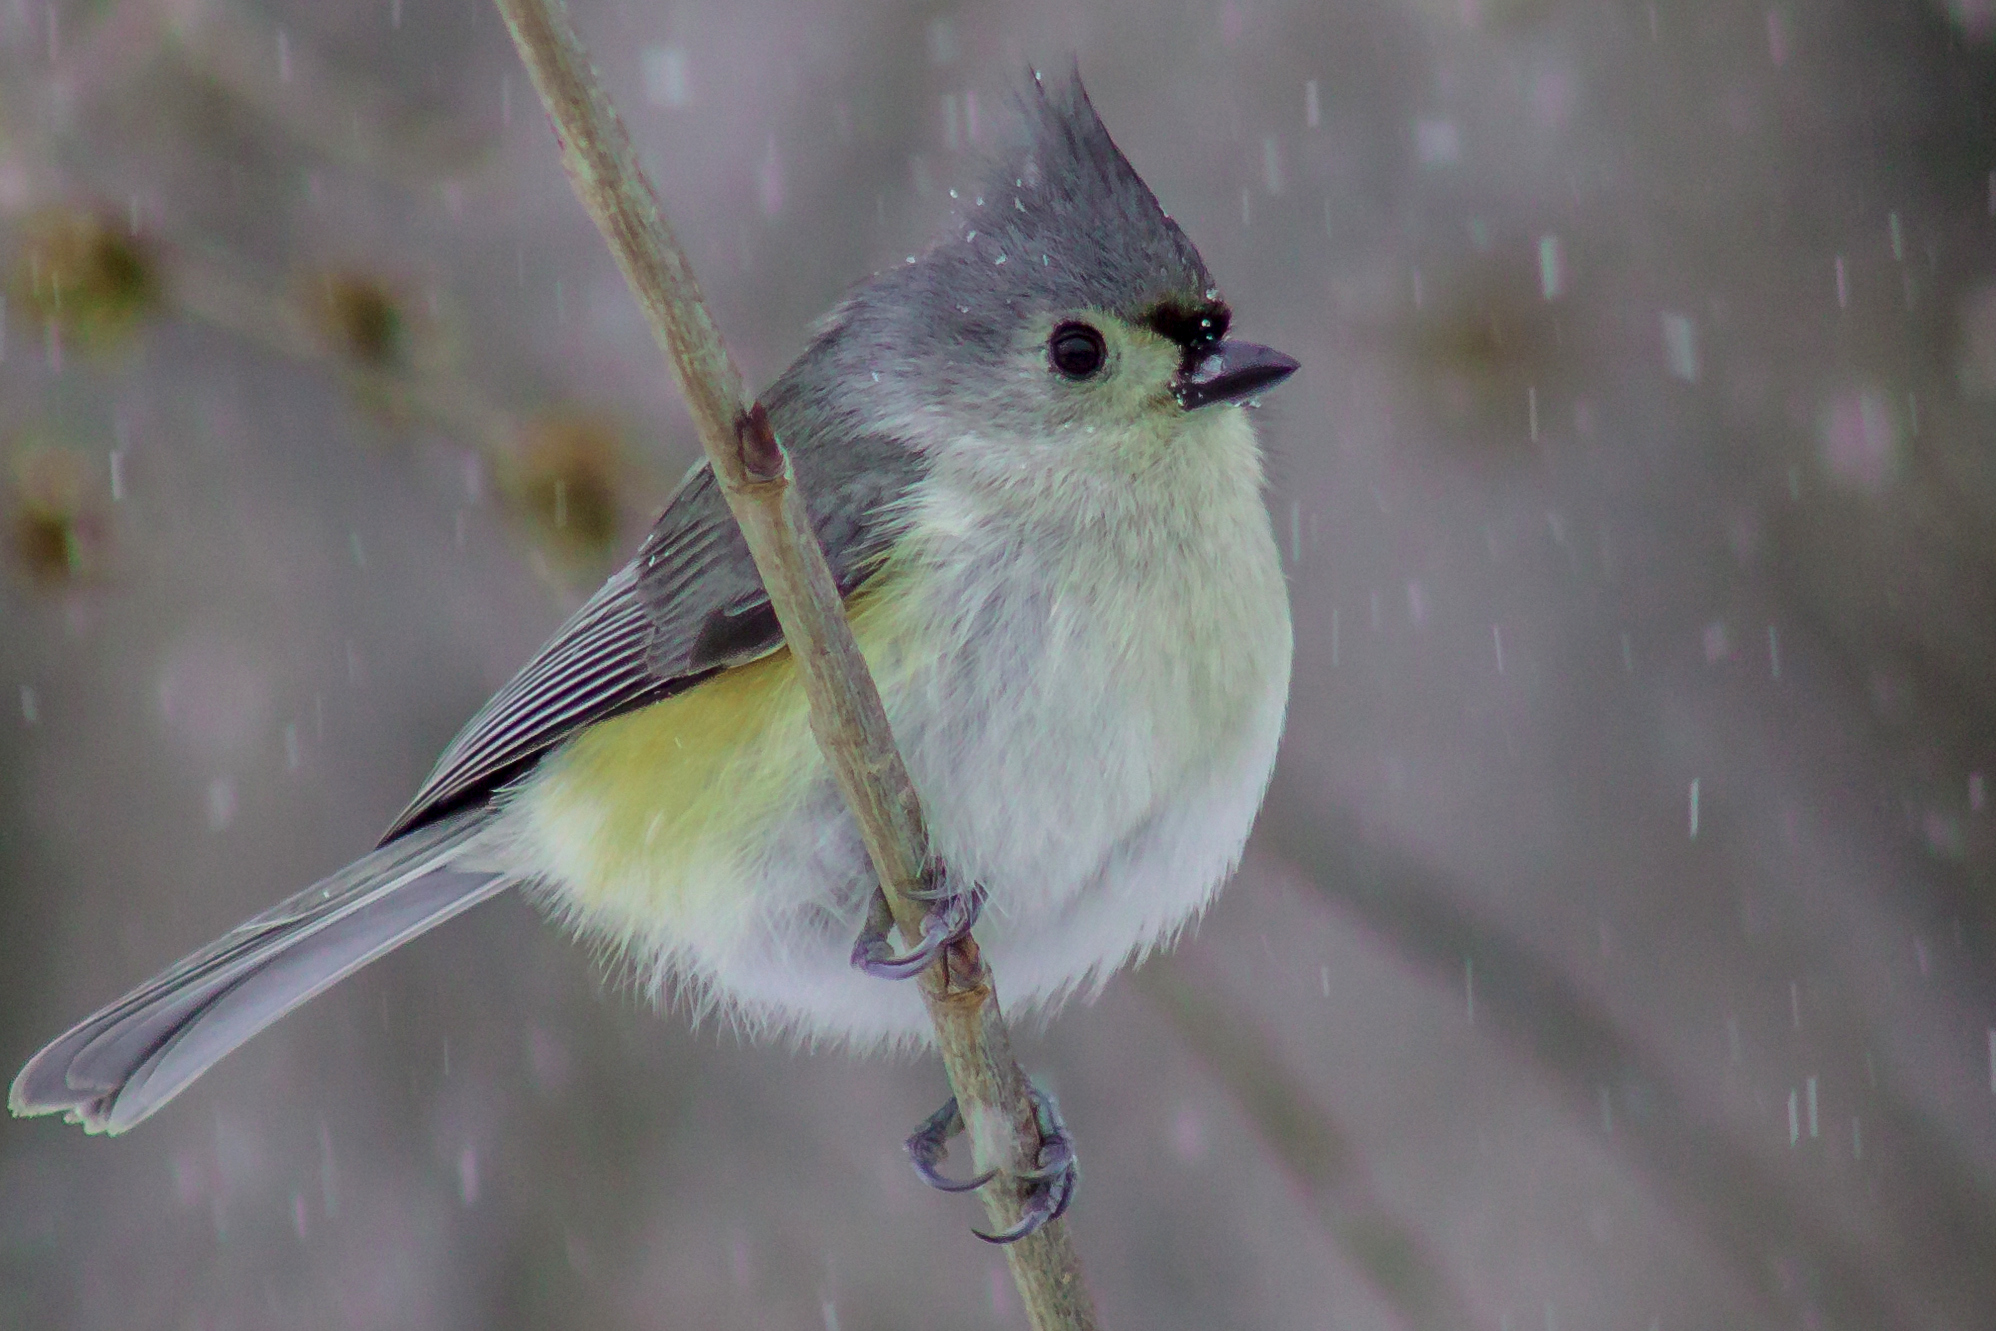 One bird, two bird, three bird, more: participate in the Great Backyard Bird Count this weekend 